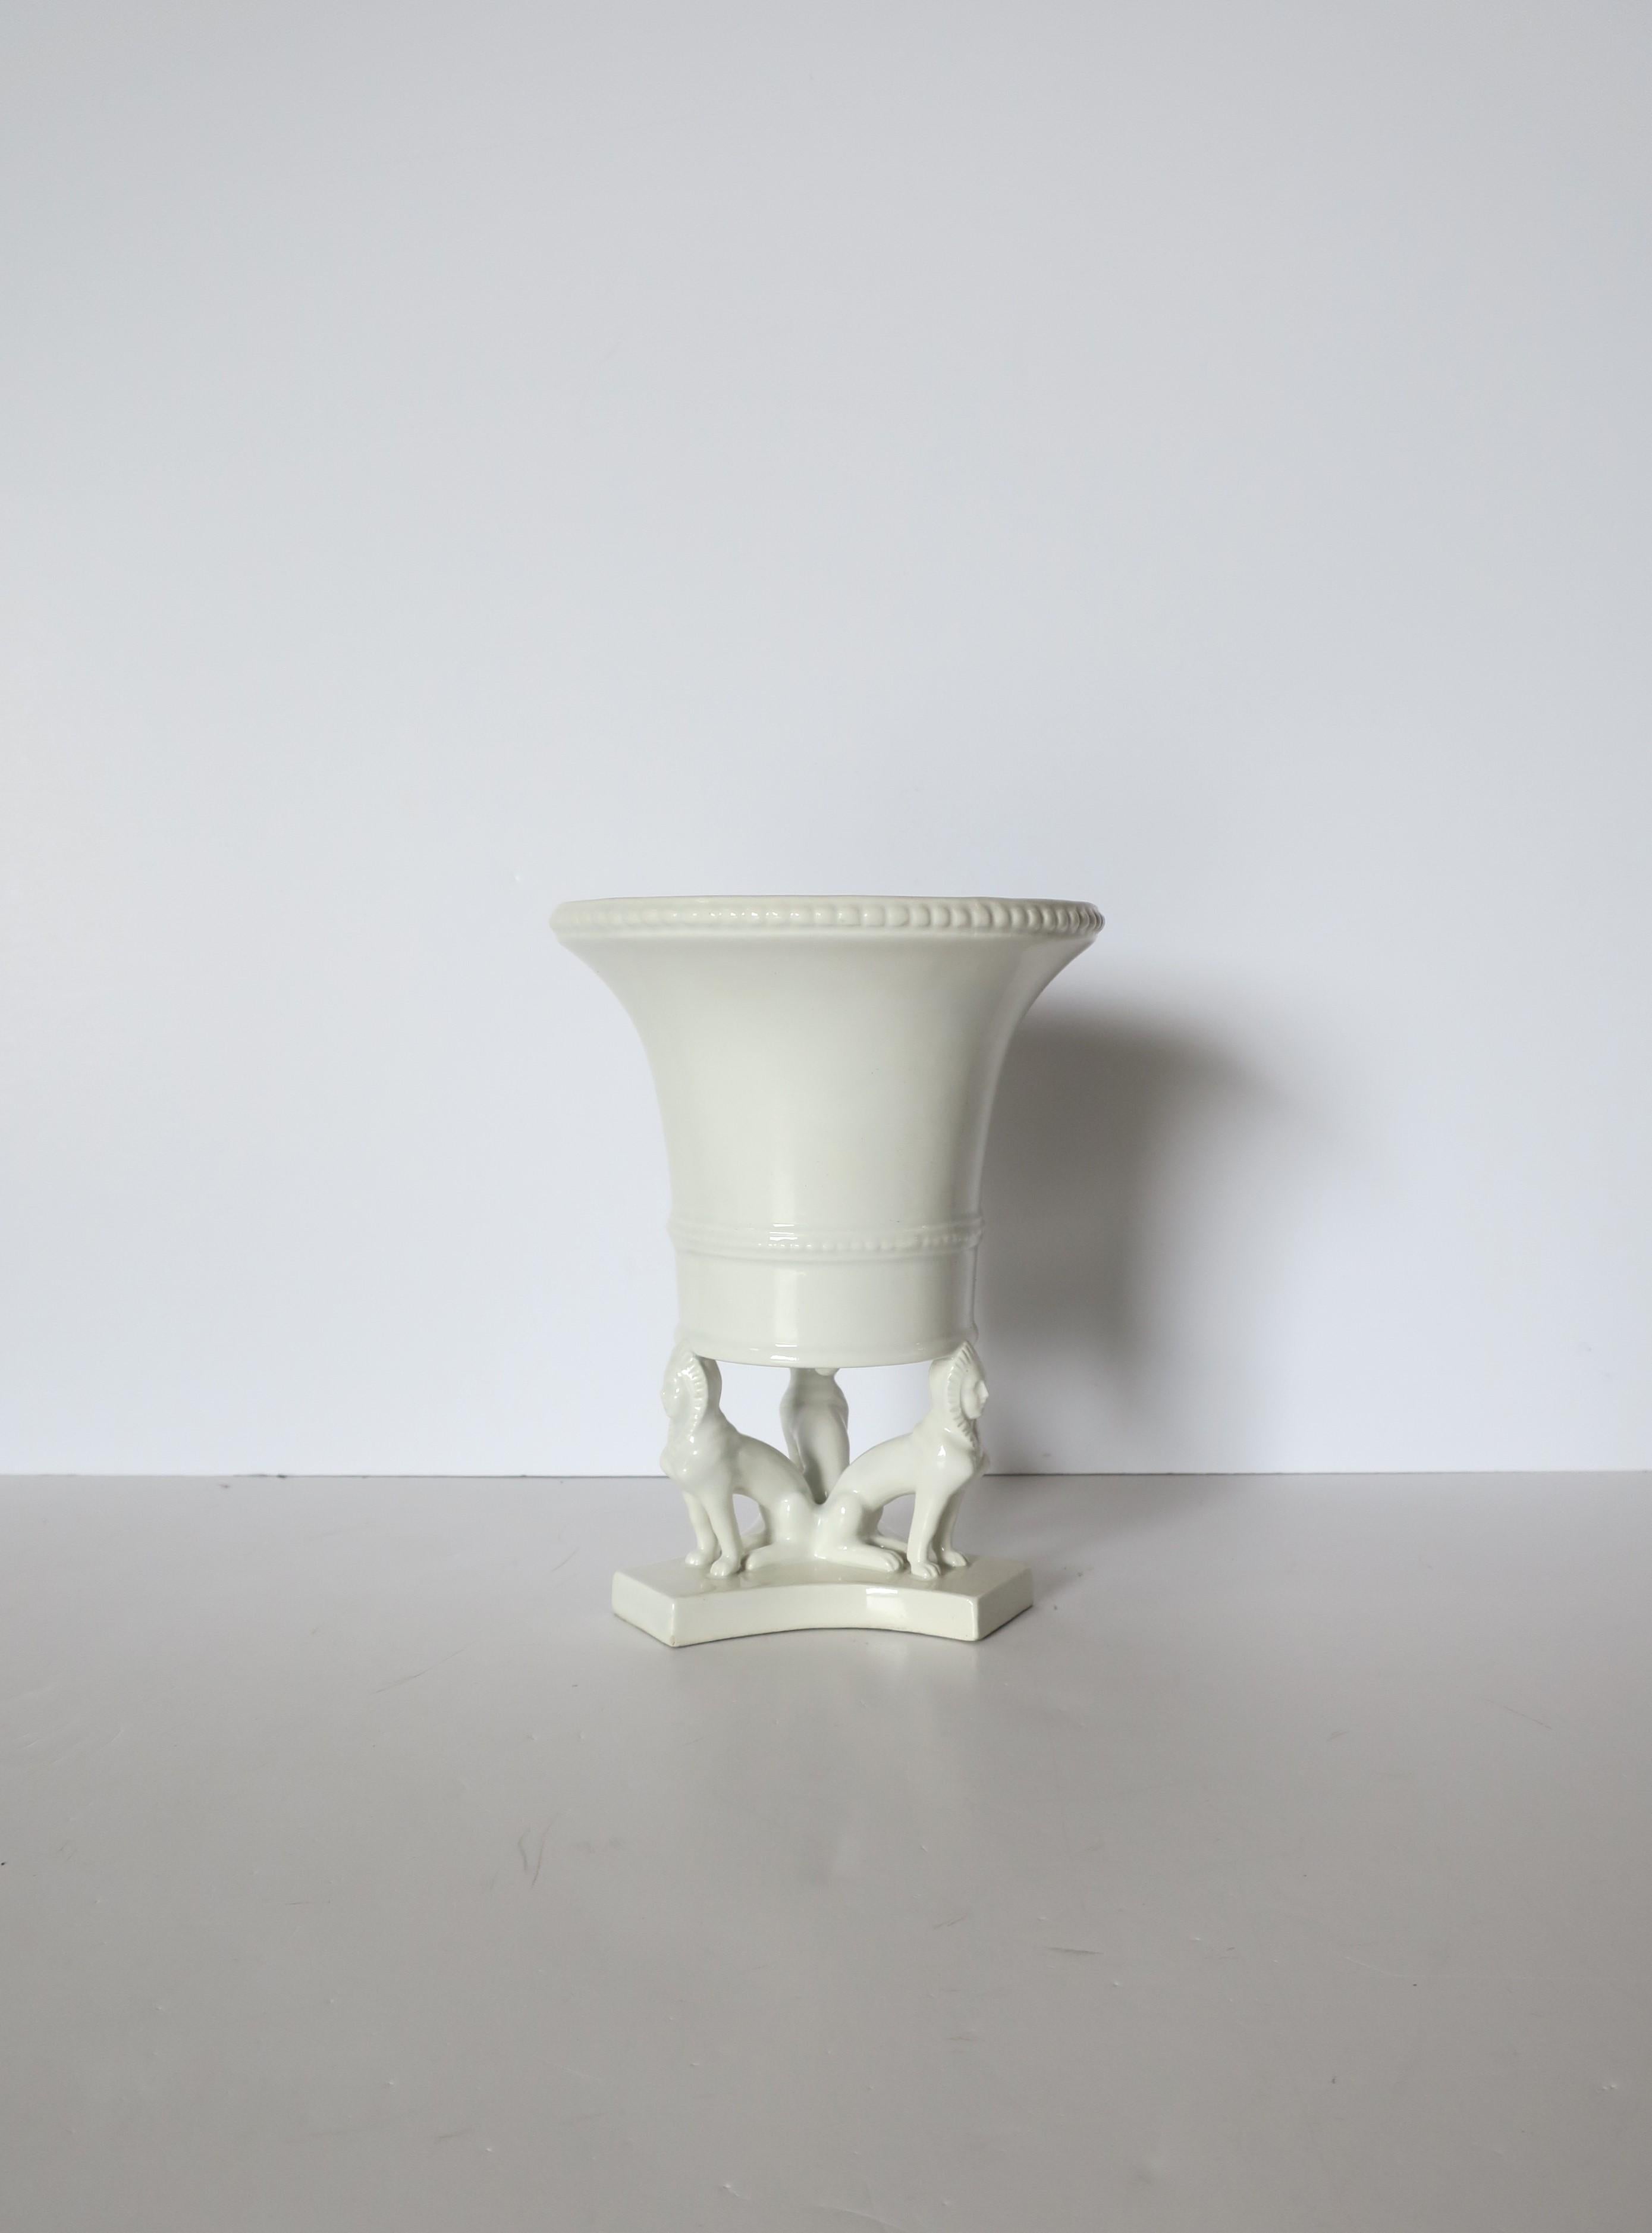 An Italian white ceramic urn vase or cachepot planter in the Egyptian Revival style, circa late-20th century, Italy. A white urn vase or cachepot (flower or plant planter) with three Egyptian Pharaoh dogs around base. Beautiful as a standalone